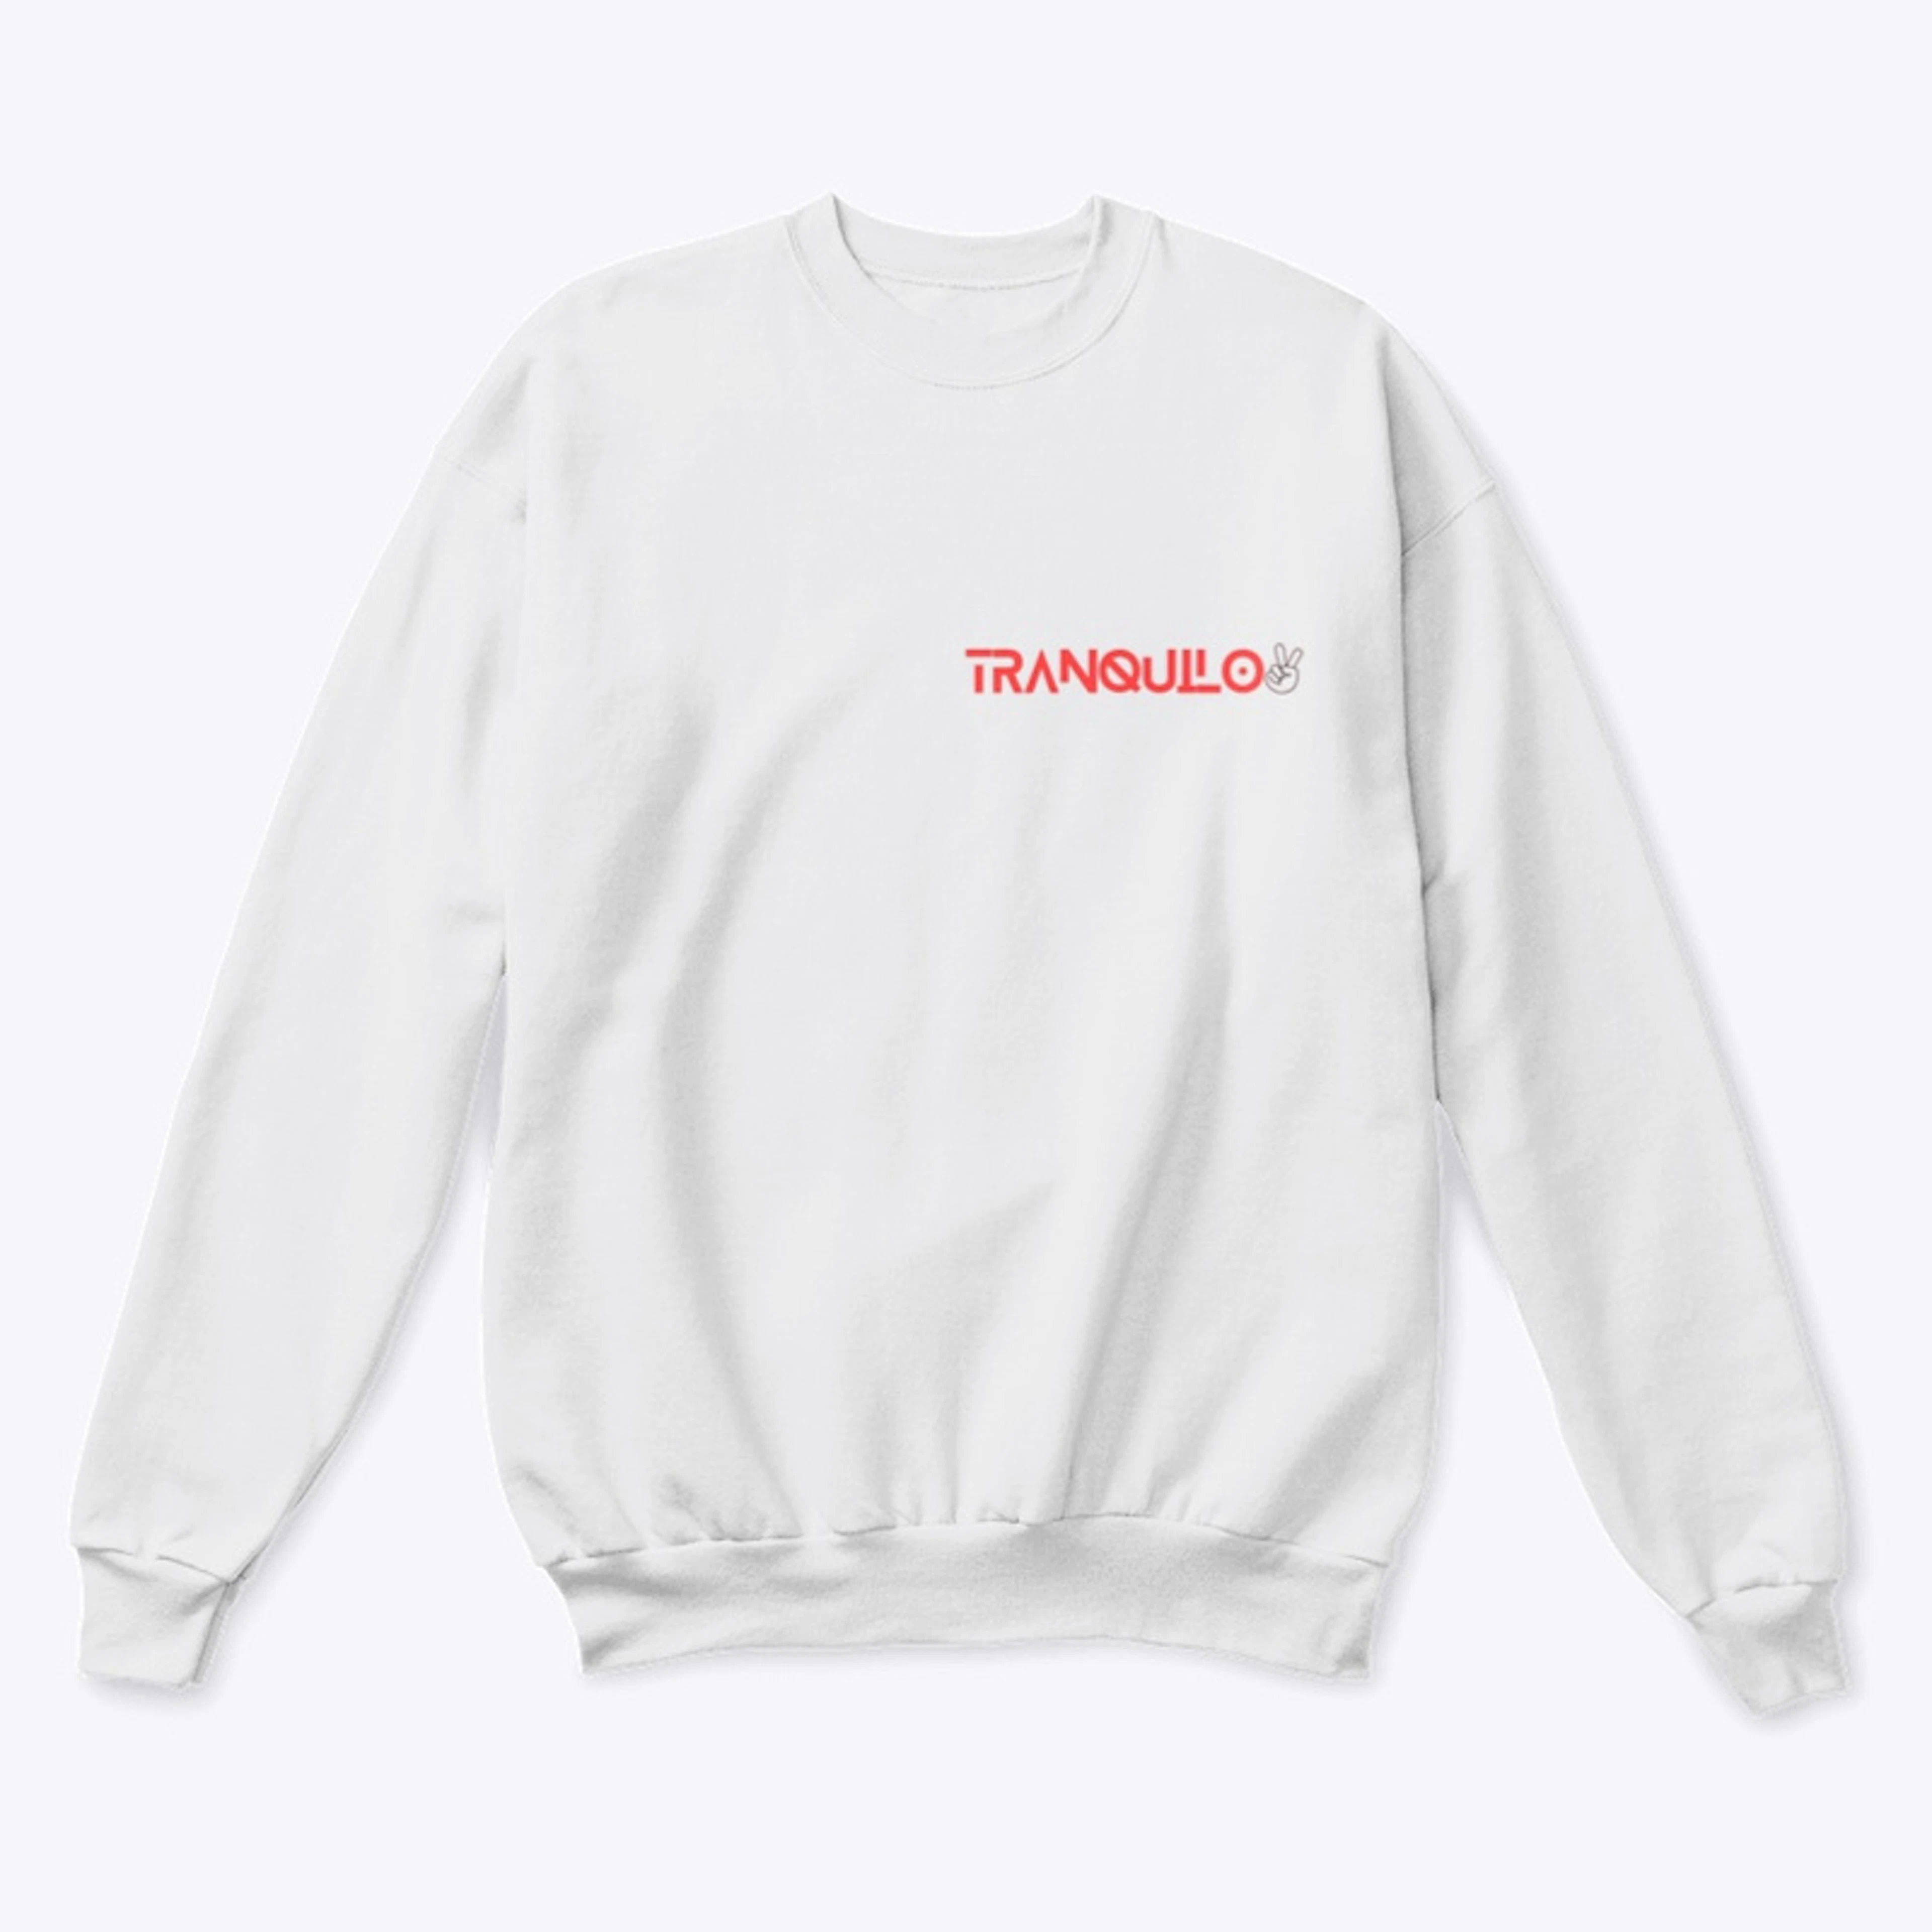 Tranquilo Collection